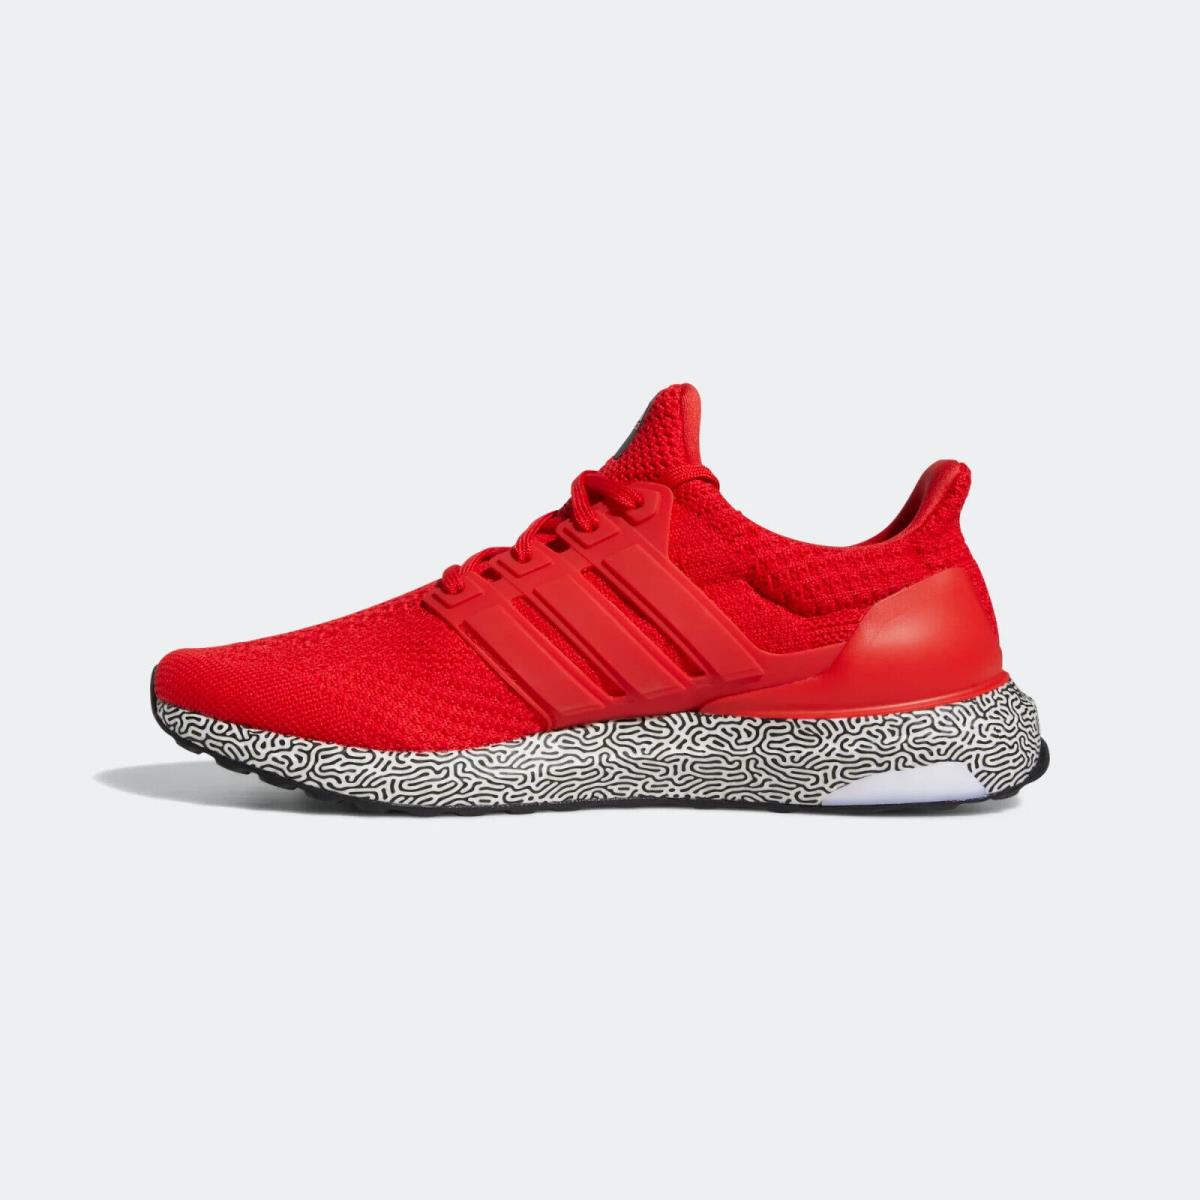 Adidas shoes UltraBoost DNA - Red 2